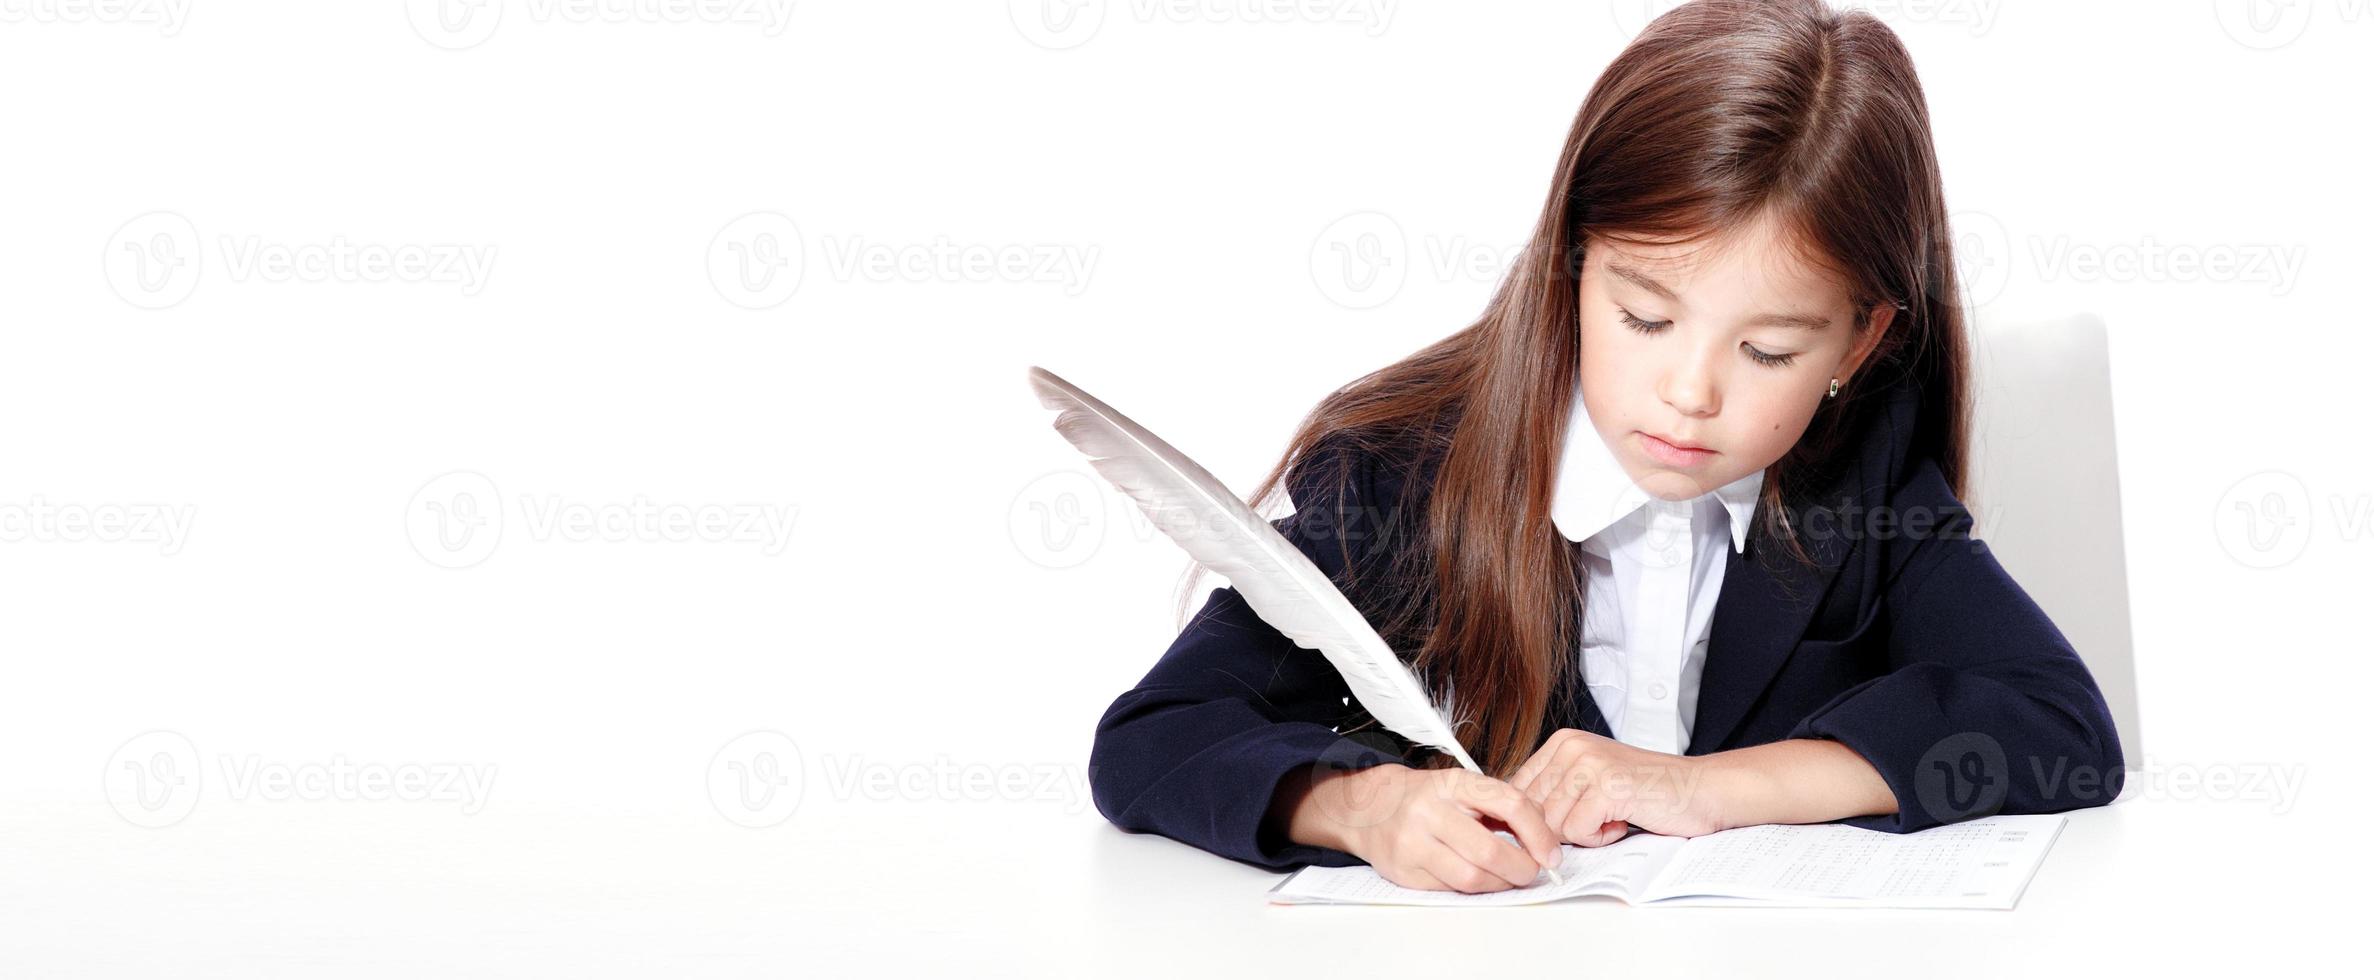 Happy and cute teen school girl writes in a book or notebook photo